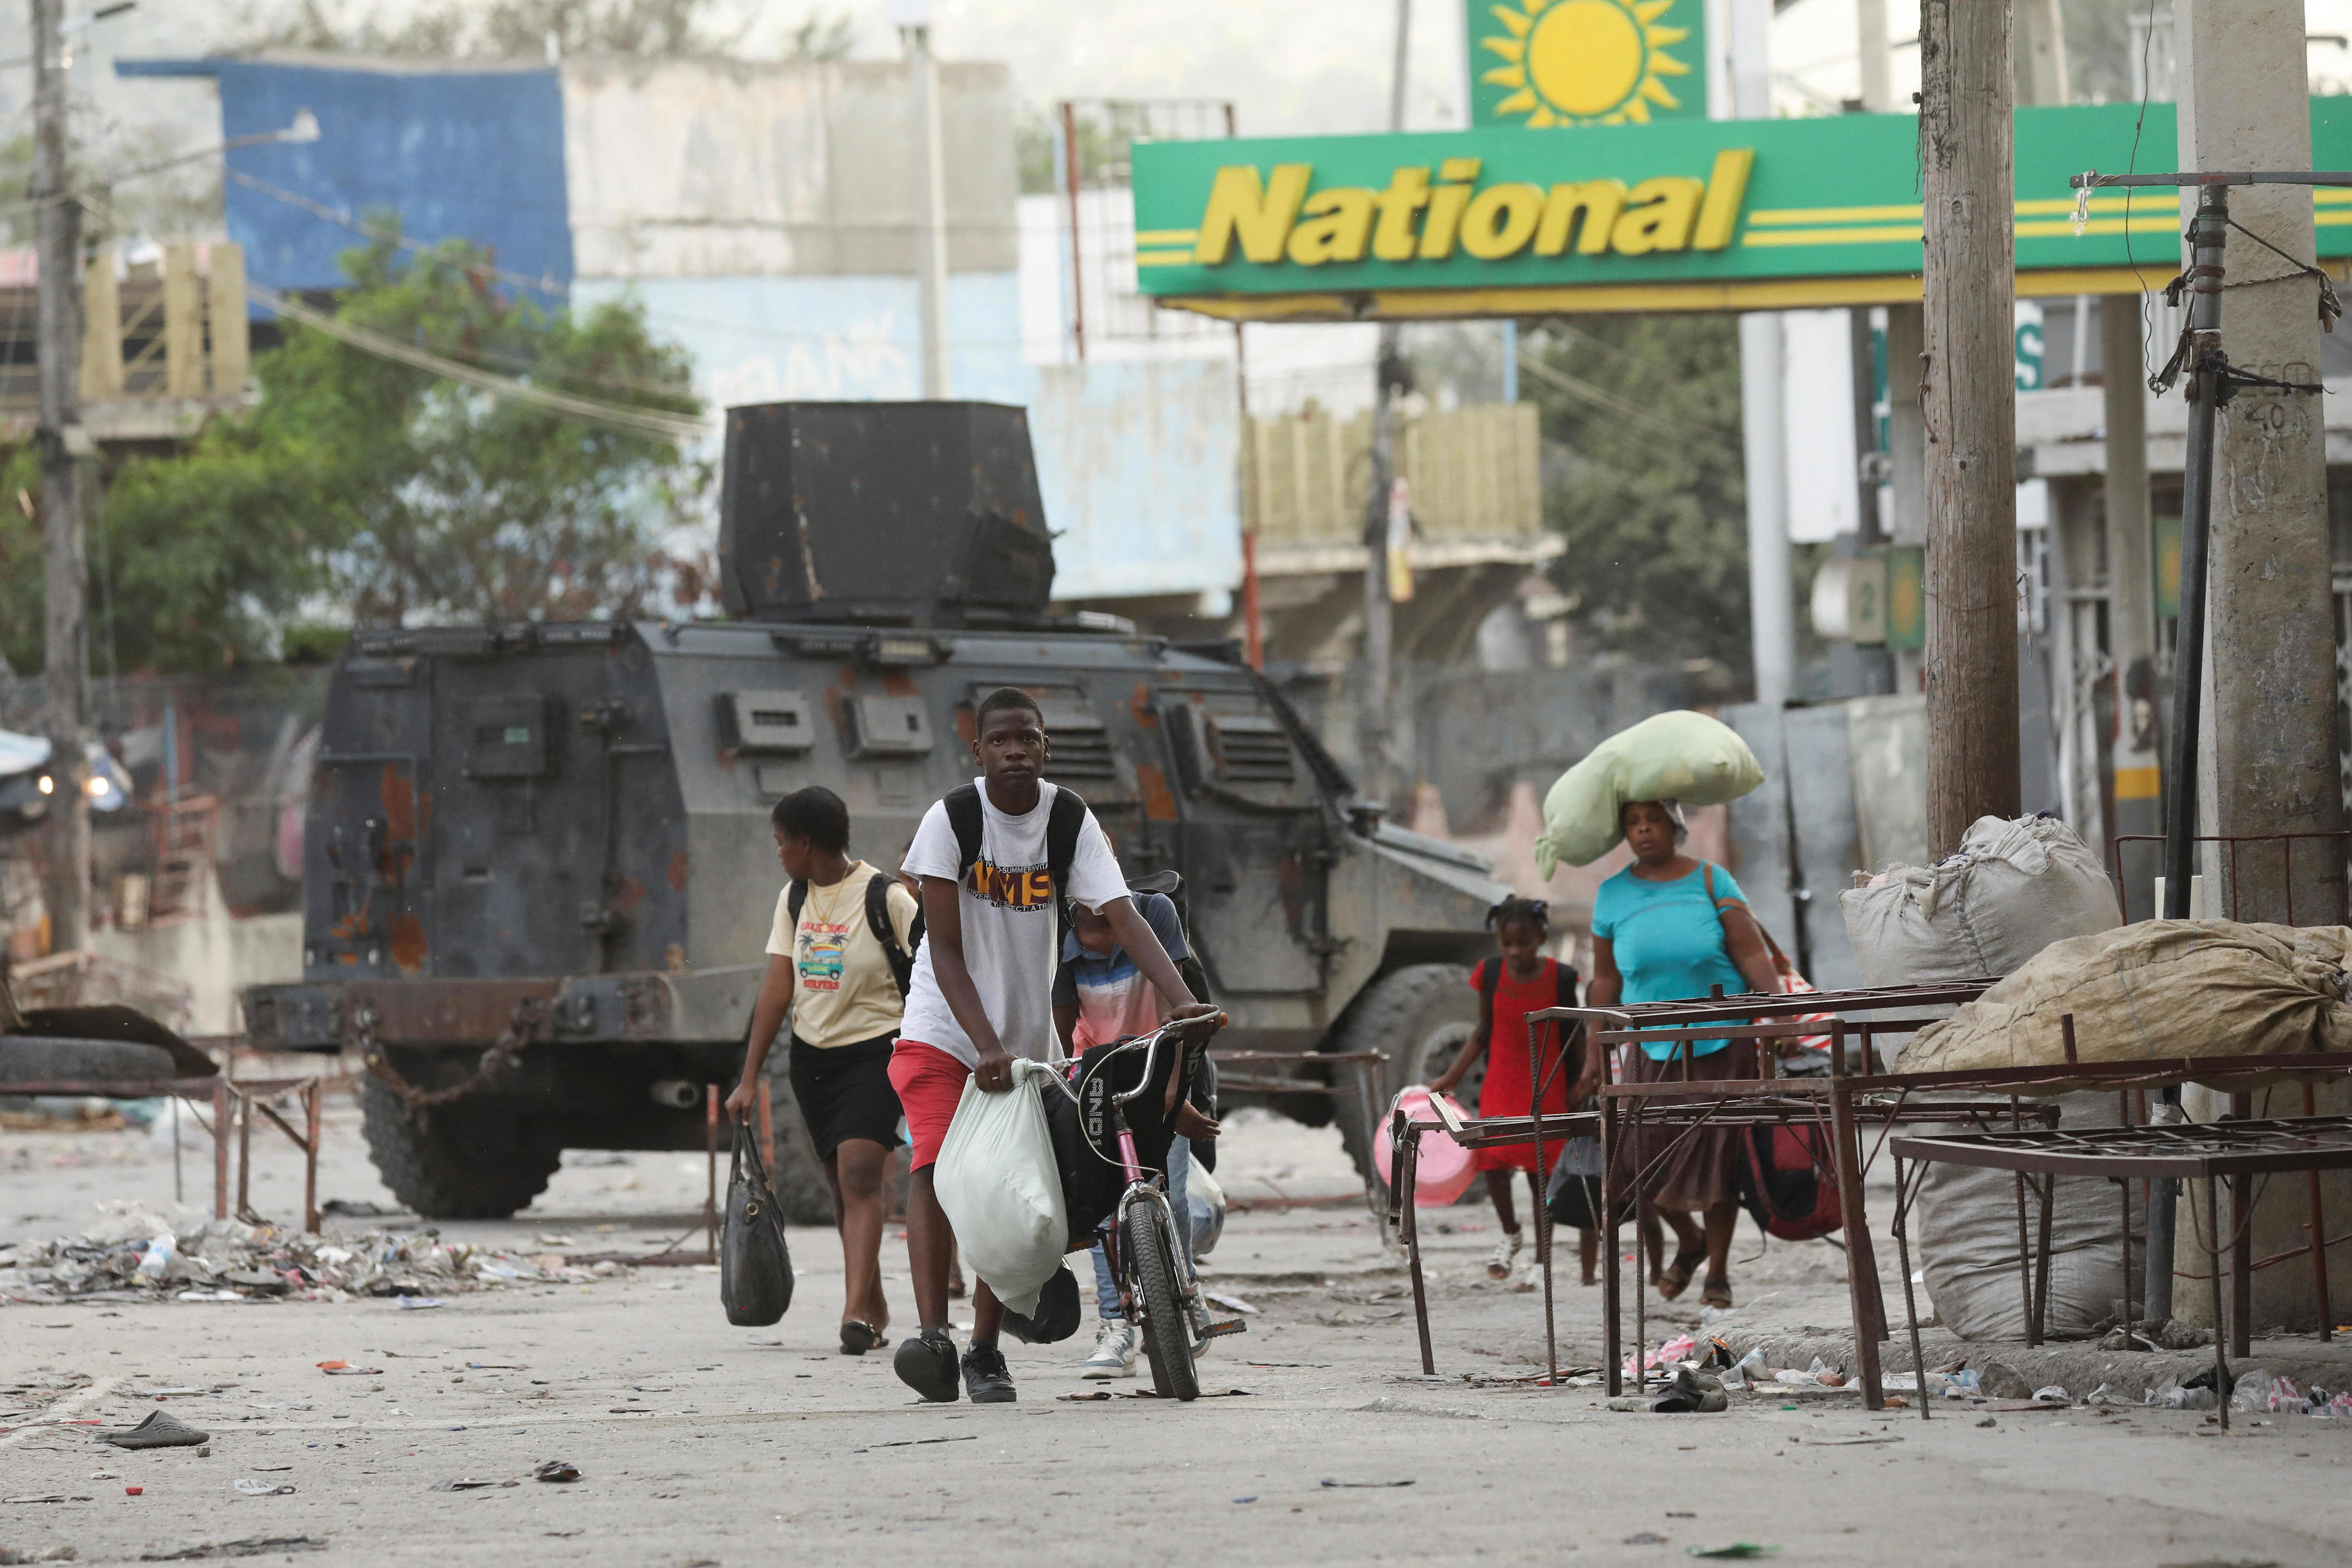 haitian gangs launch coordinated attack, vow to oust prime minister